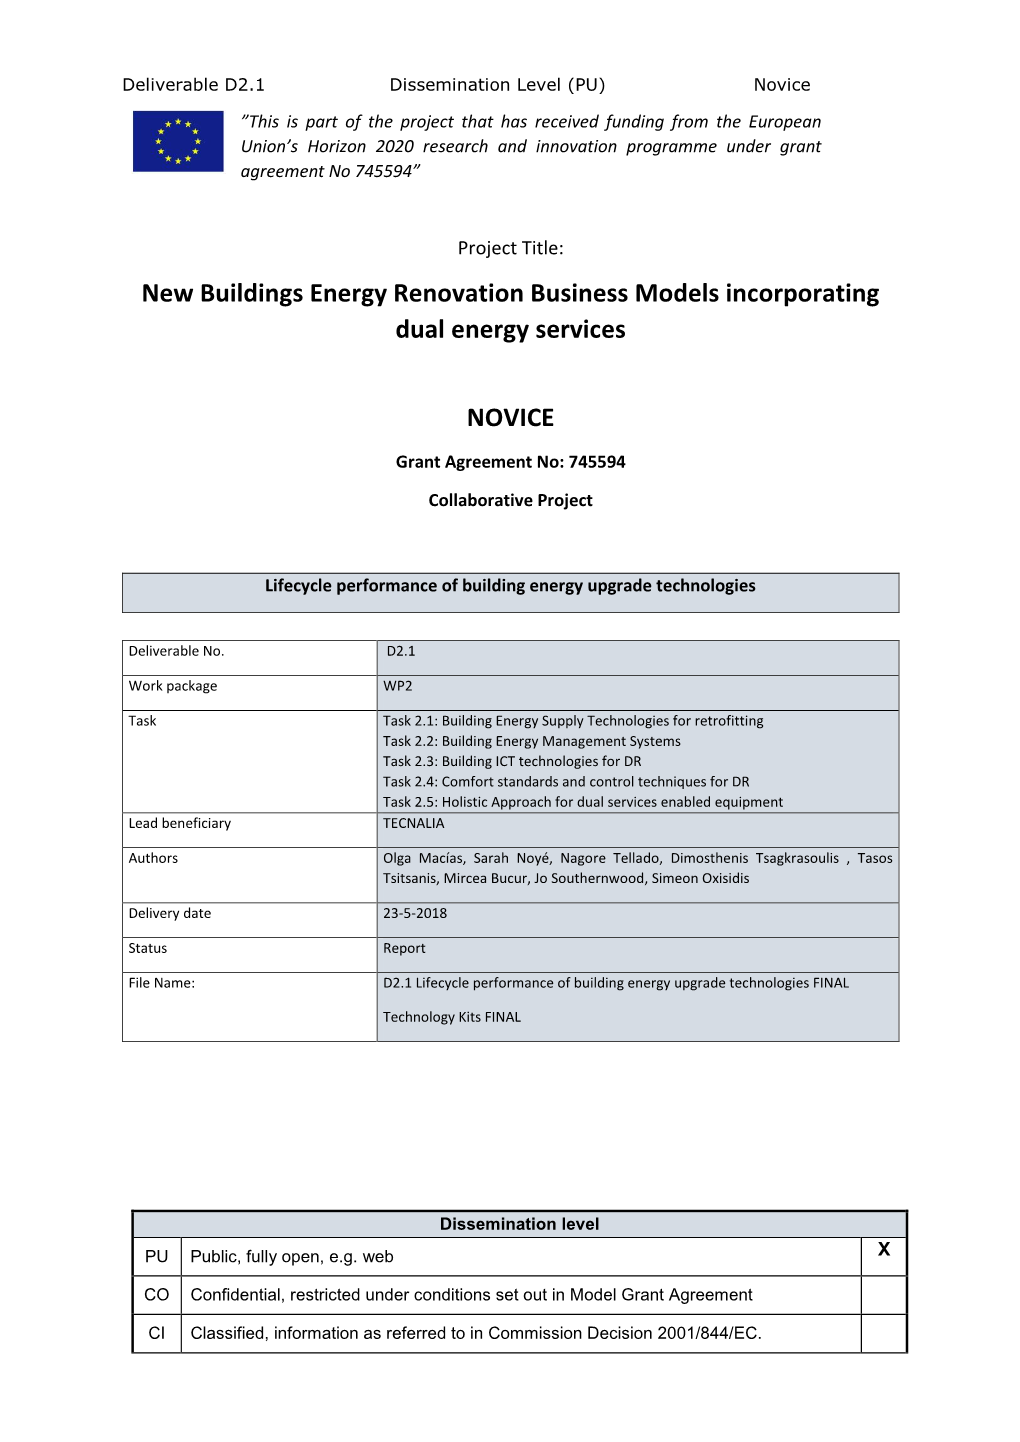 D2.1 Lifecycle Performance of Building Energy Upgrade Technologies FINAL